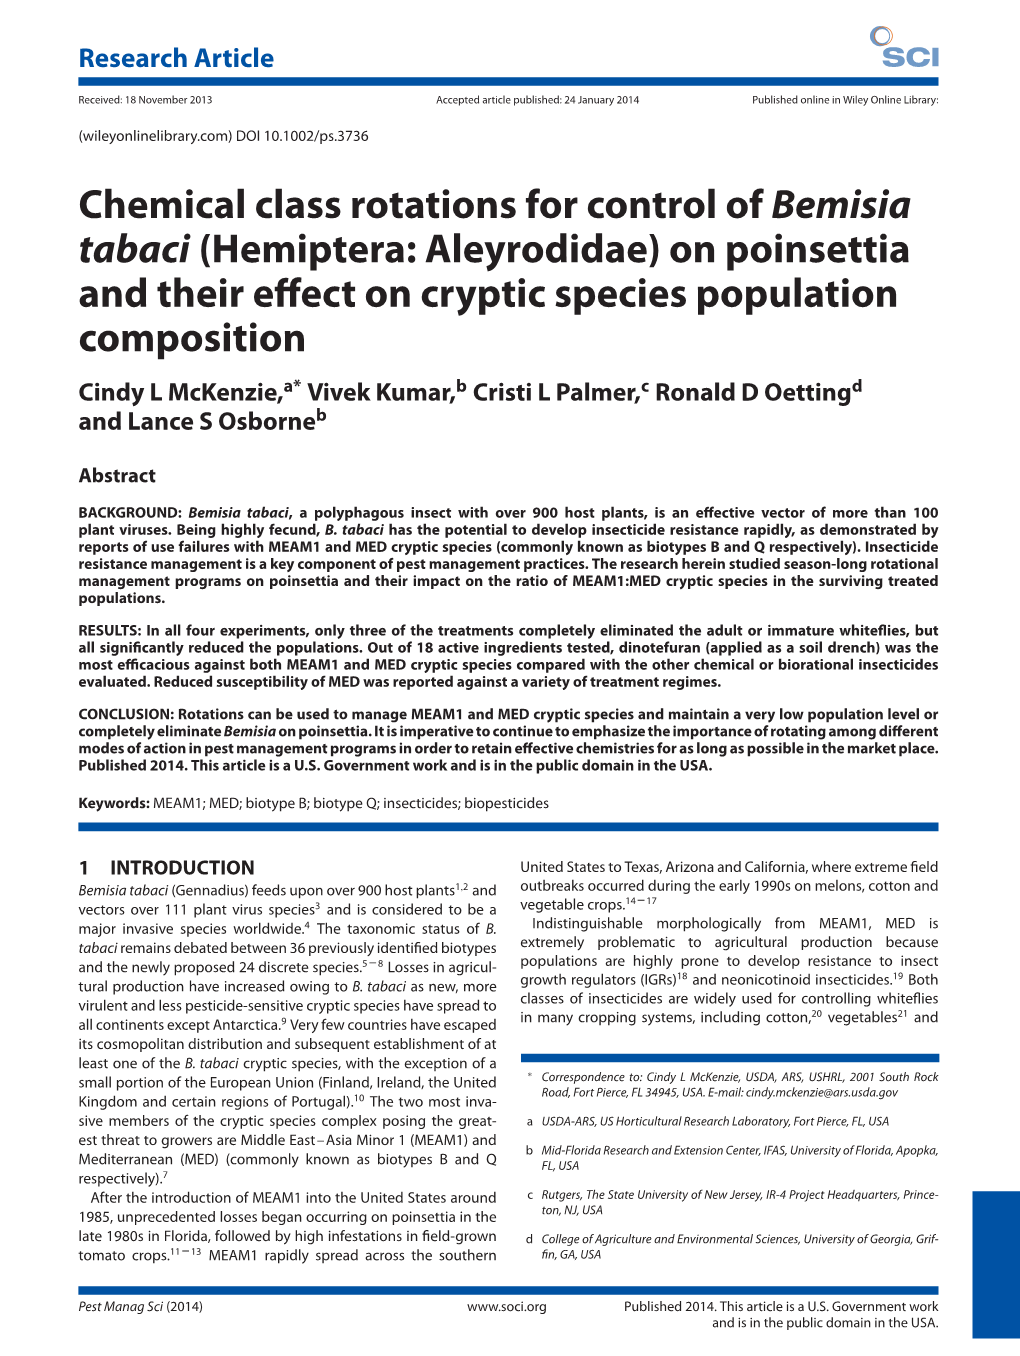 Chemical Class Rotations for Control of Bemisia Tabaci